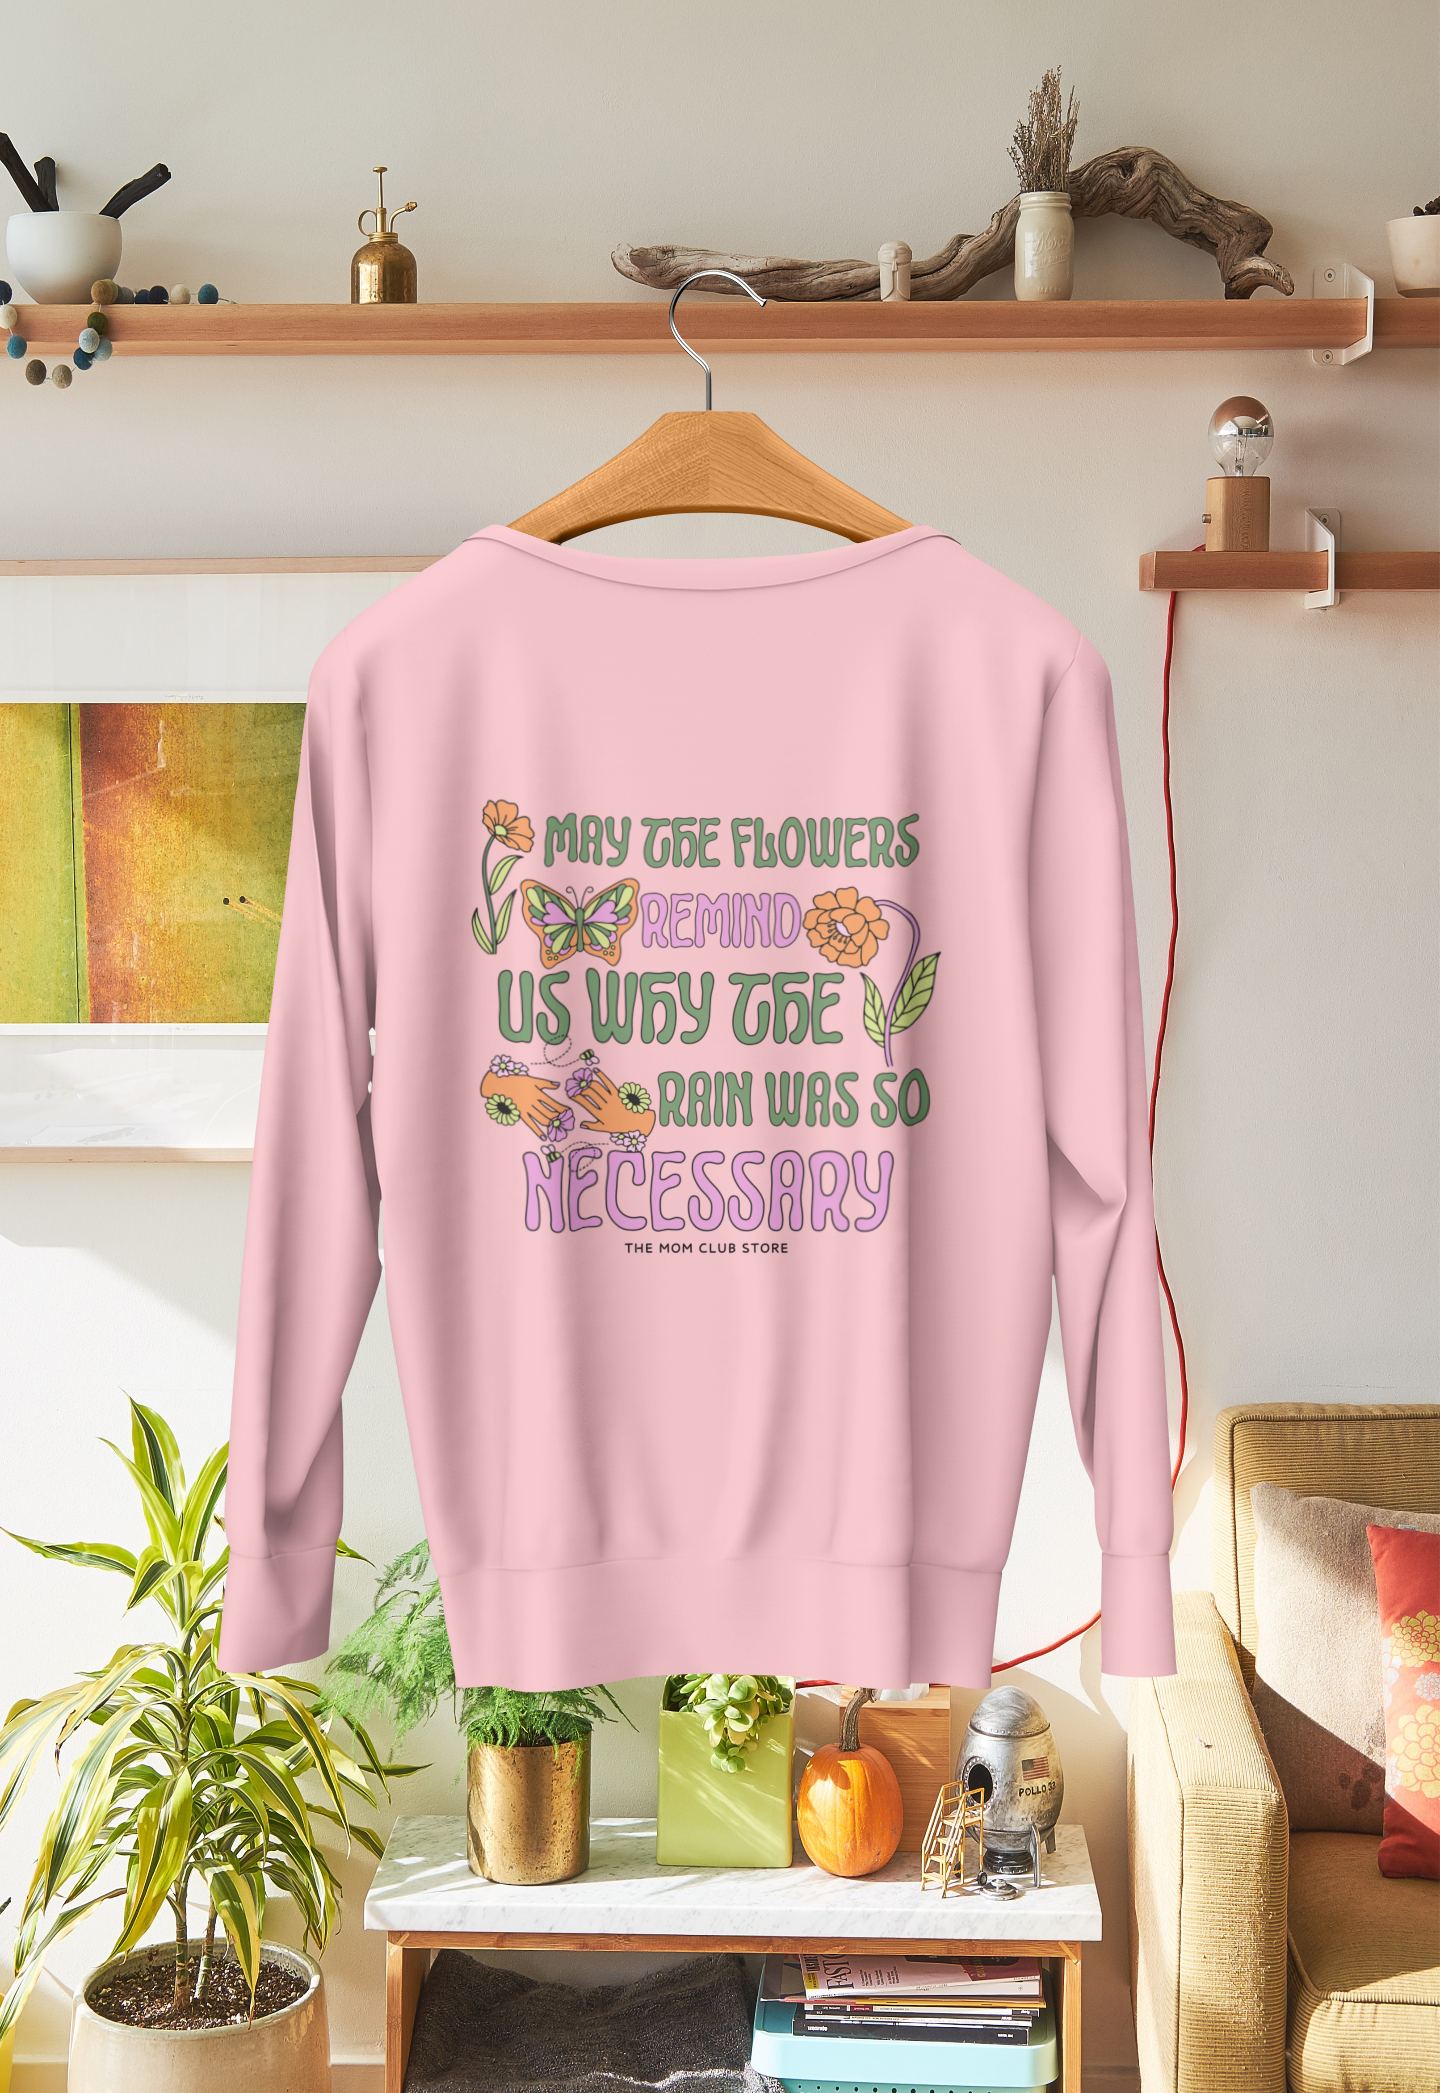 Crewneck sweatshirt -MAY THE FLOWERS- for adults